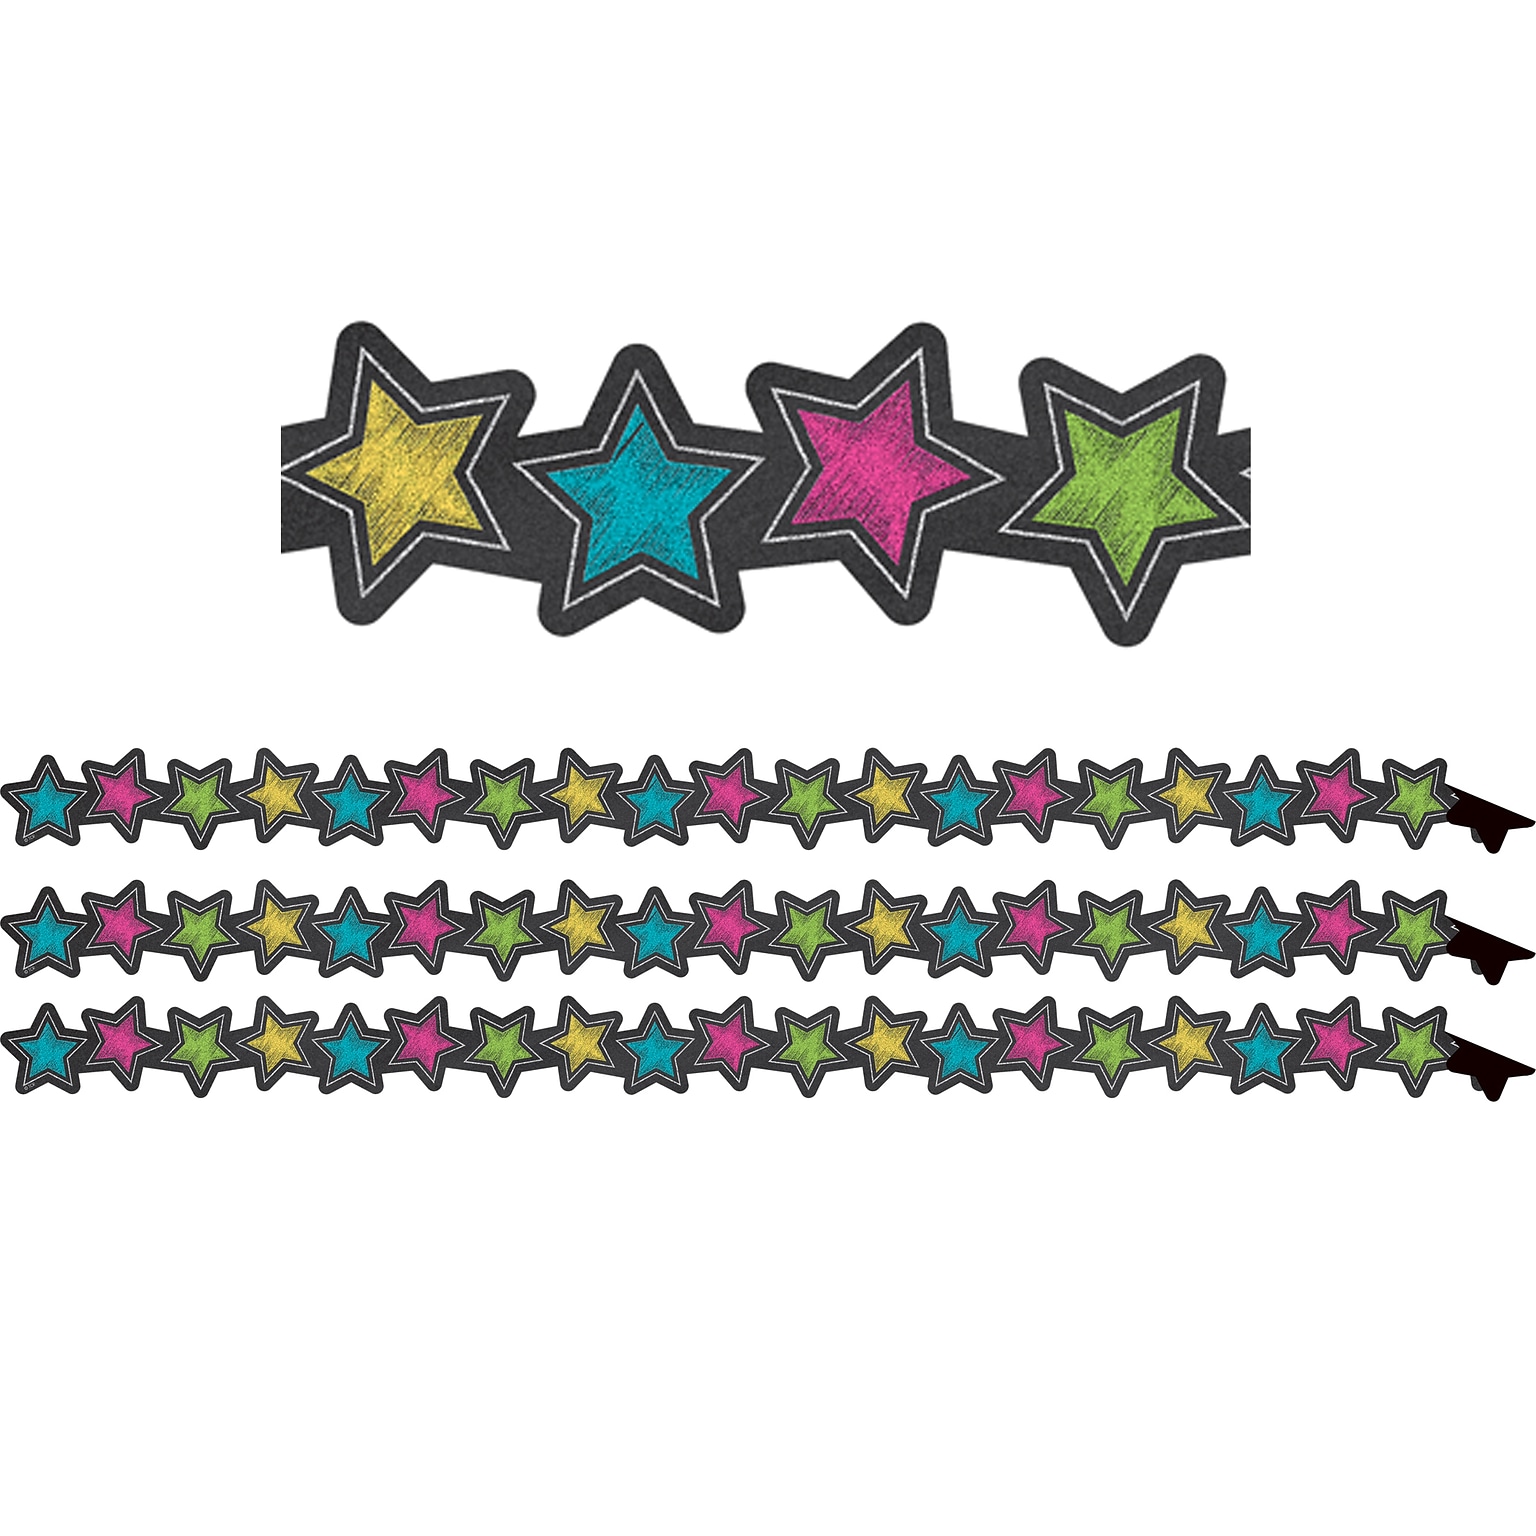 Teacher Created Resources Chalkboard Brights Stars Magnetic Border, 24 Feet Per Pack, 3 Packs (TCR77313-3)